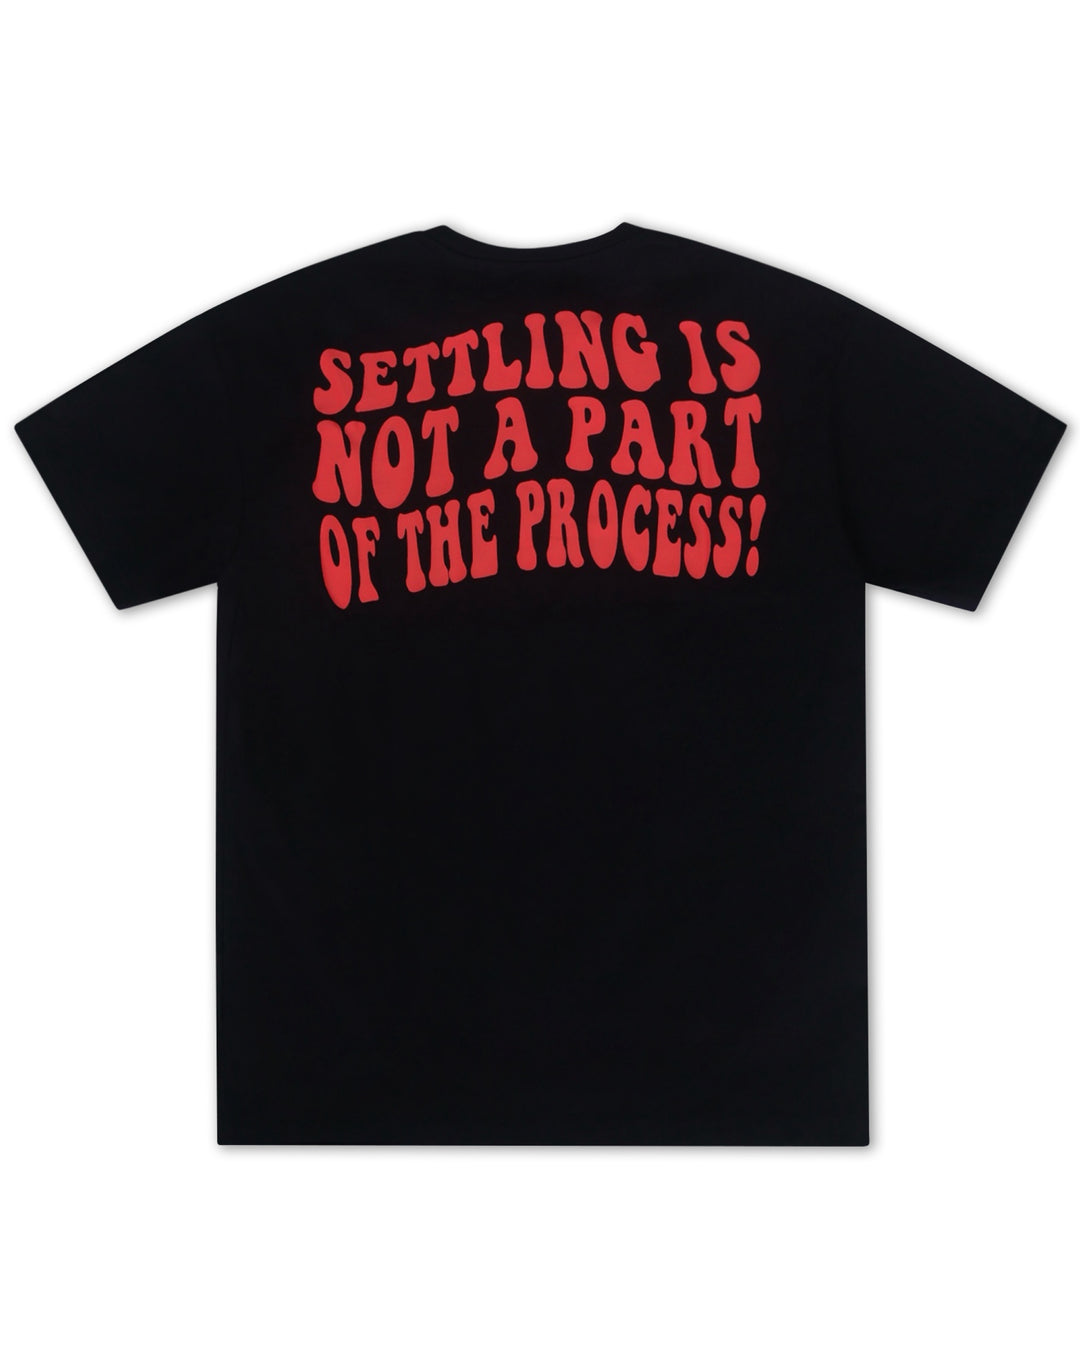 Process Tee in Black/Red